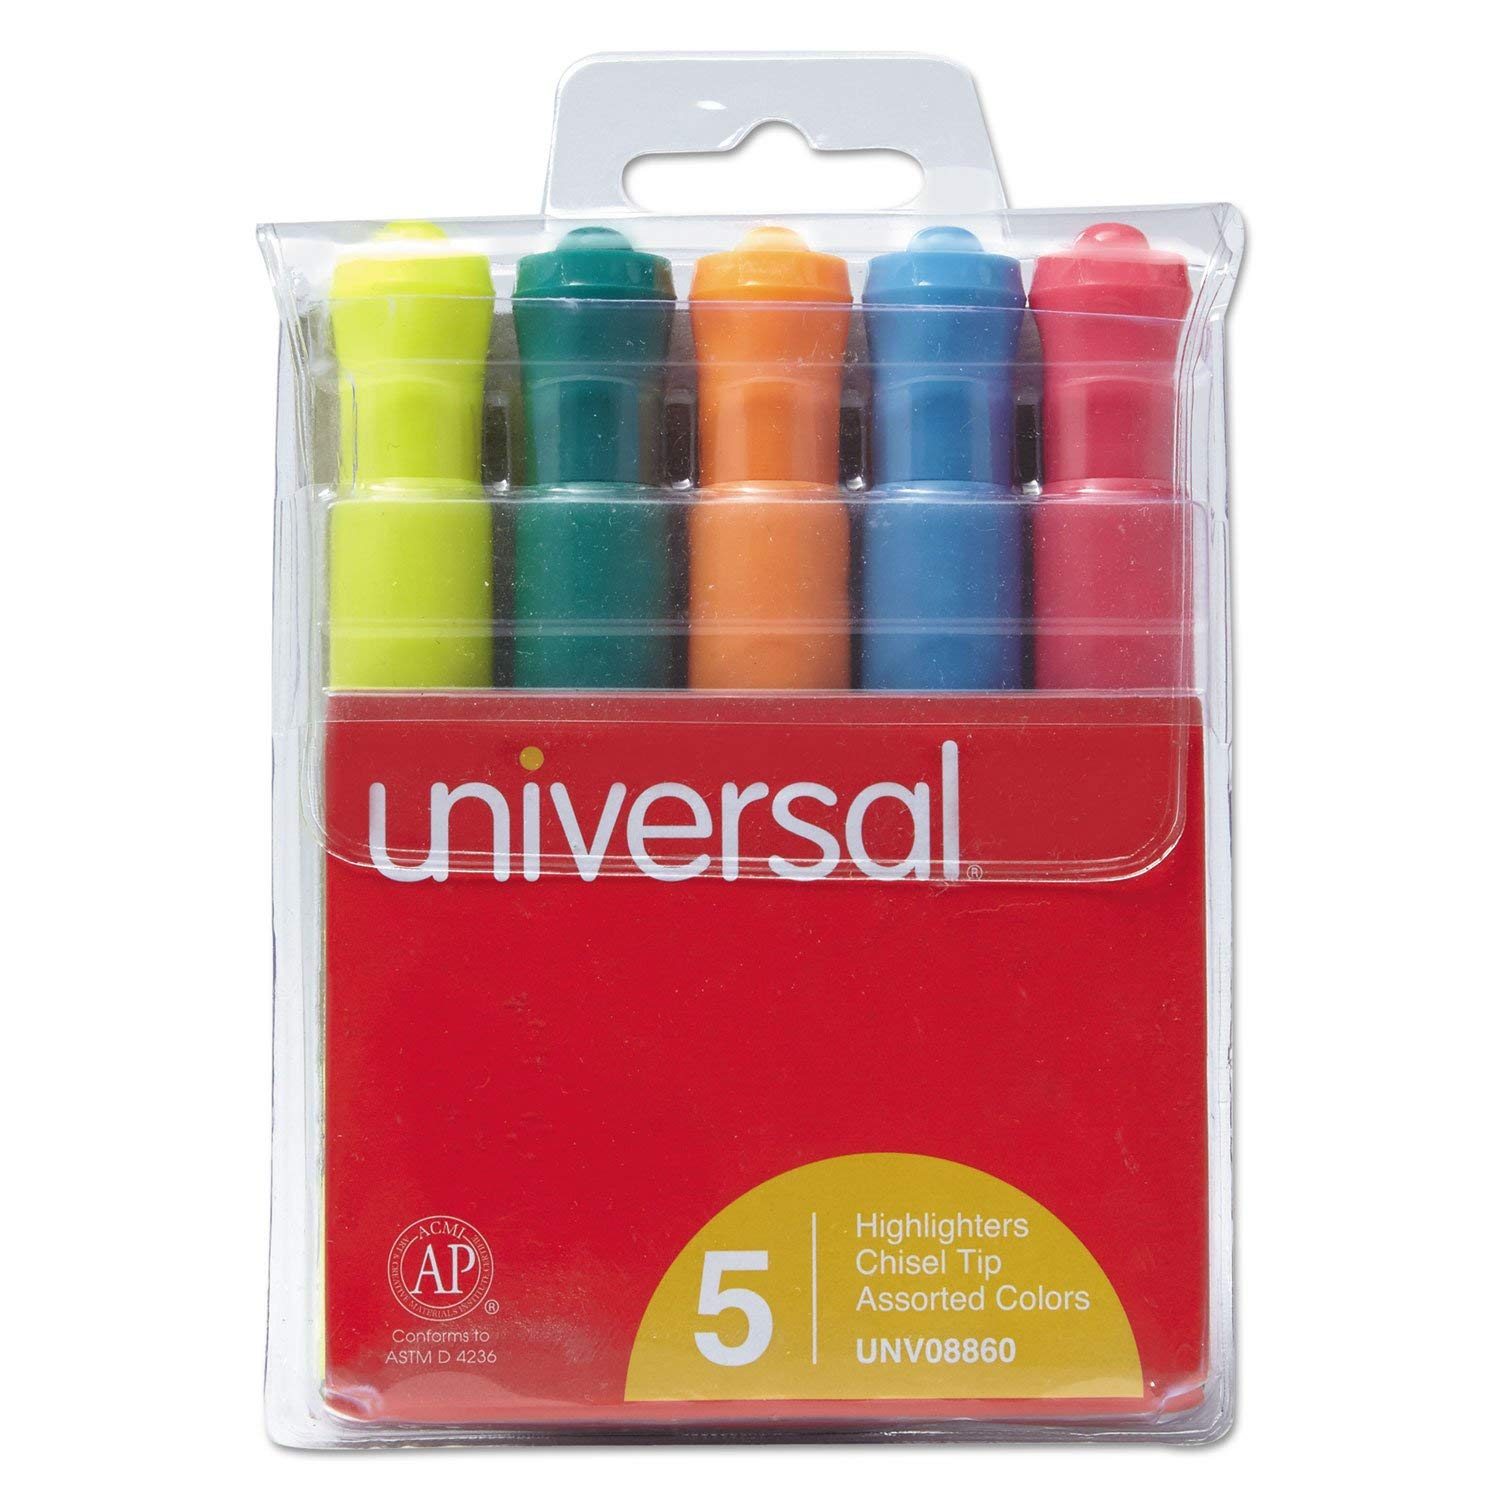 UNIVERSAL HIGHLIGHTER ASSORTED 5C COLOR